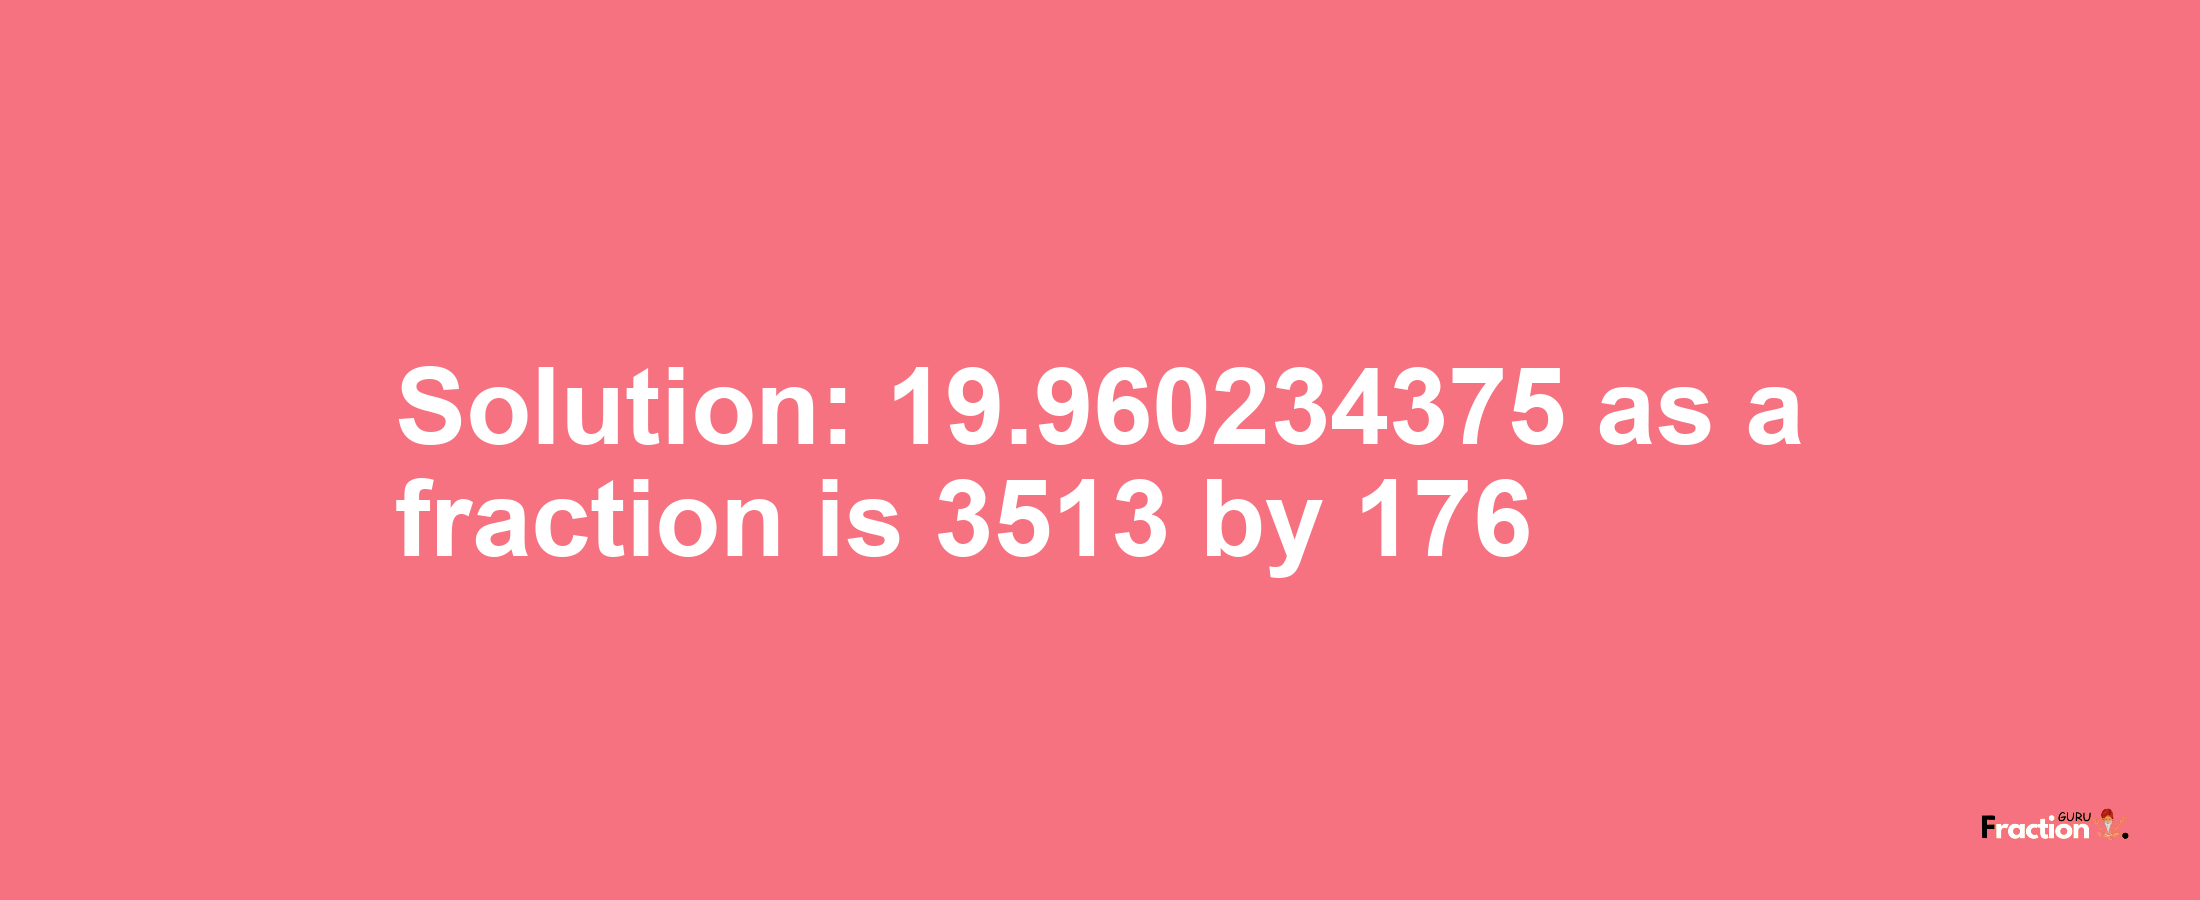 Solution:19.960234375 as a fraction is 3513/176